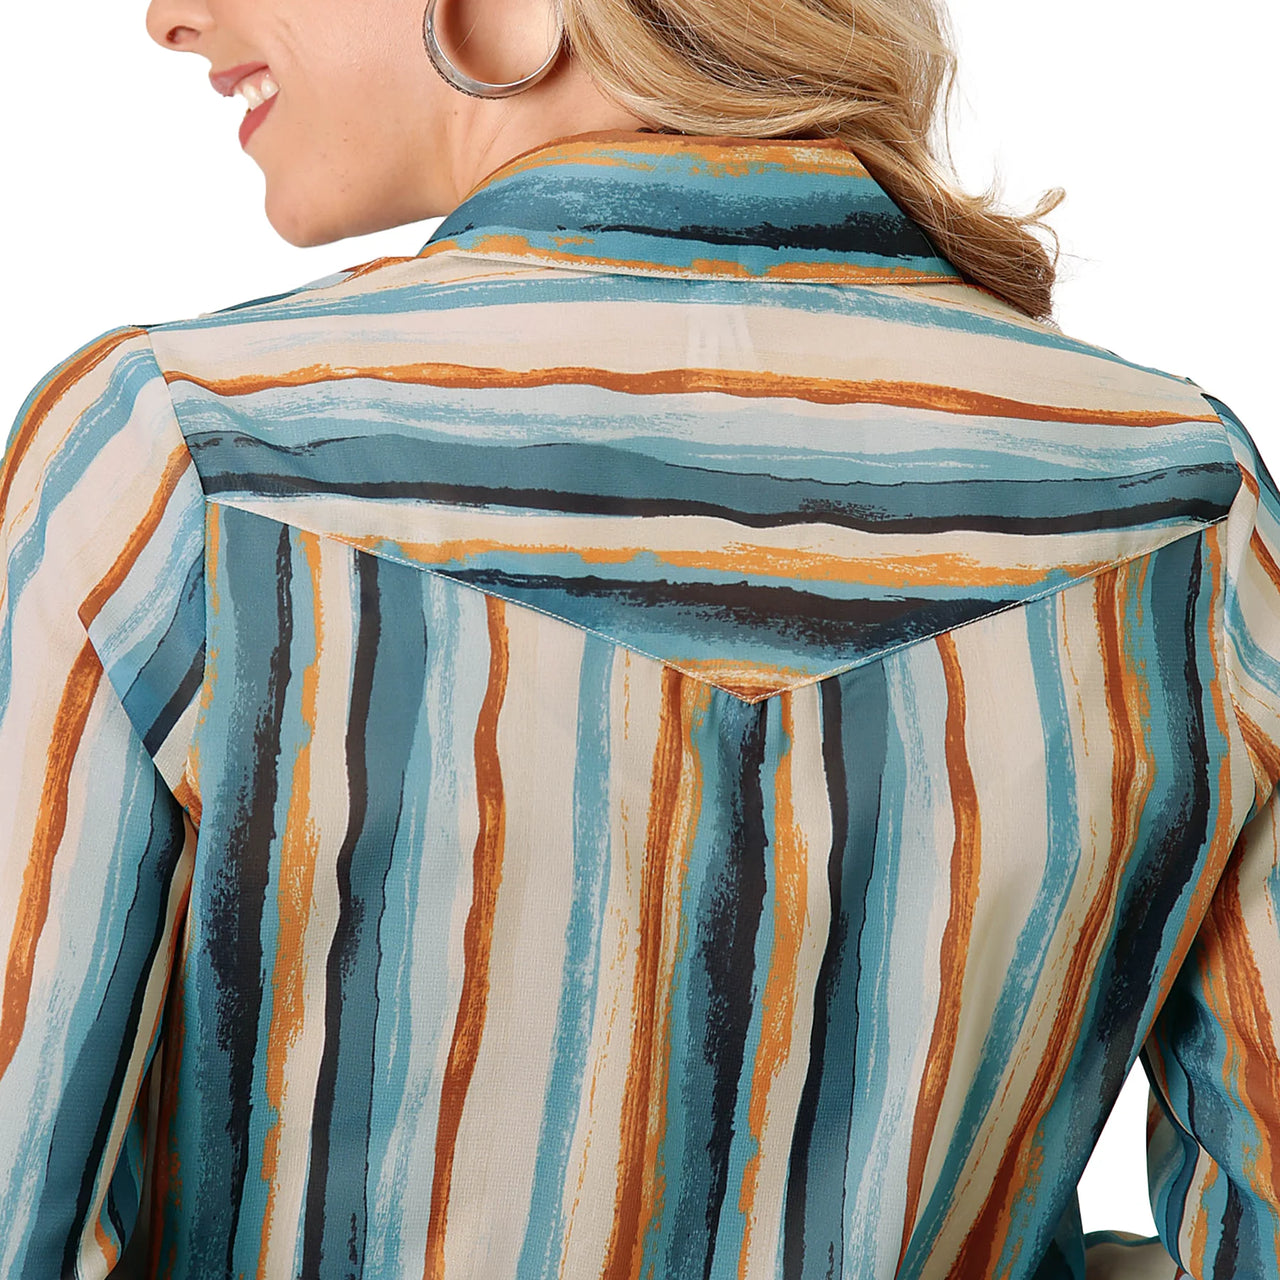 Roper Womens Studio West Collection Long Sleeve Shirt - The Trading Stables